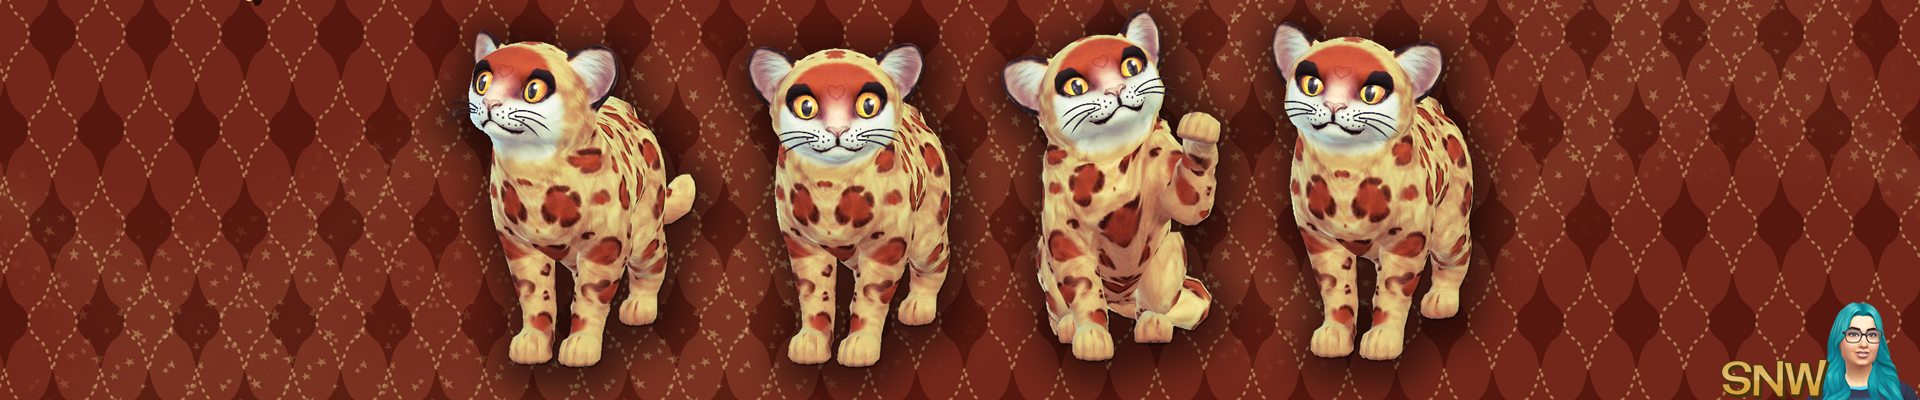 The Sims 4: Cats & Dogs - Happy Simming! Junior the Cute Leopard Cub (Kitten) wallpaper